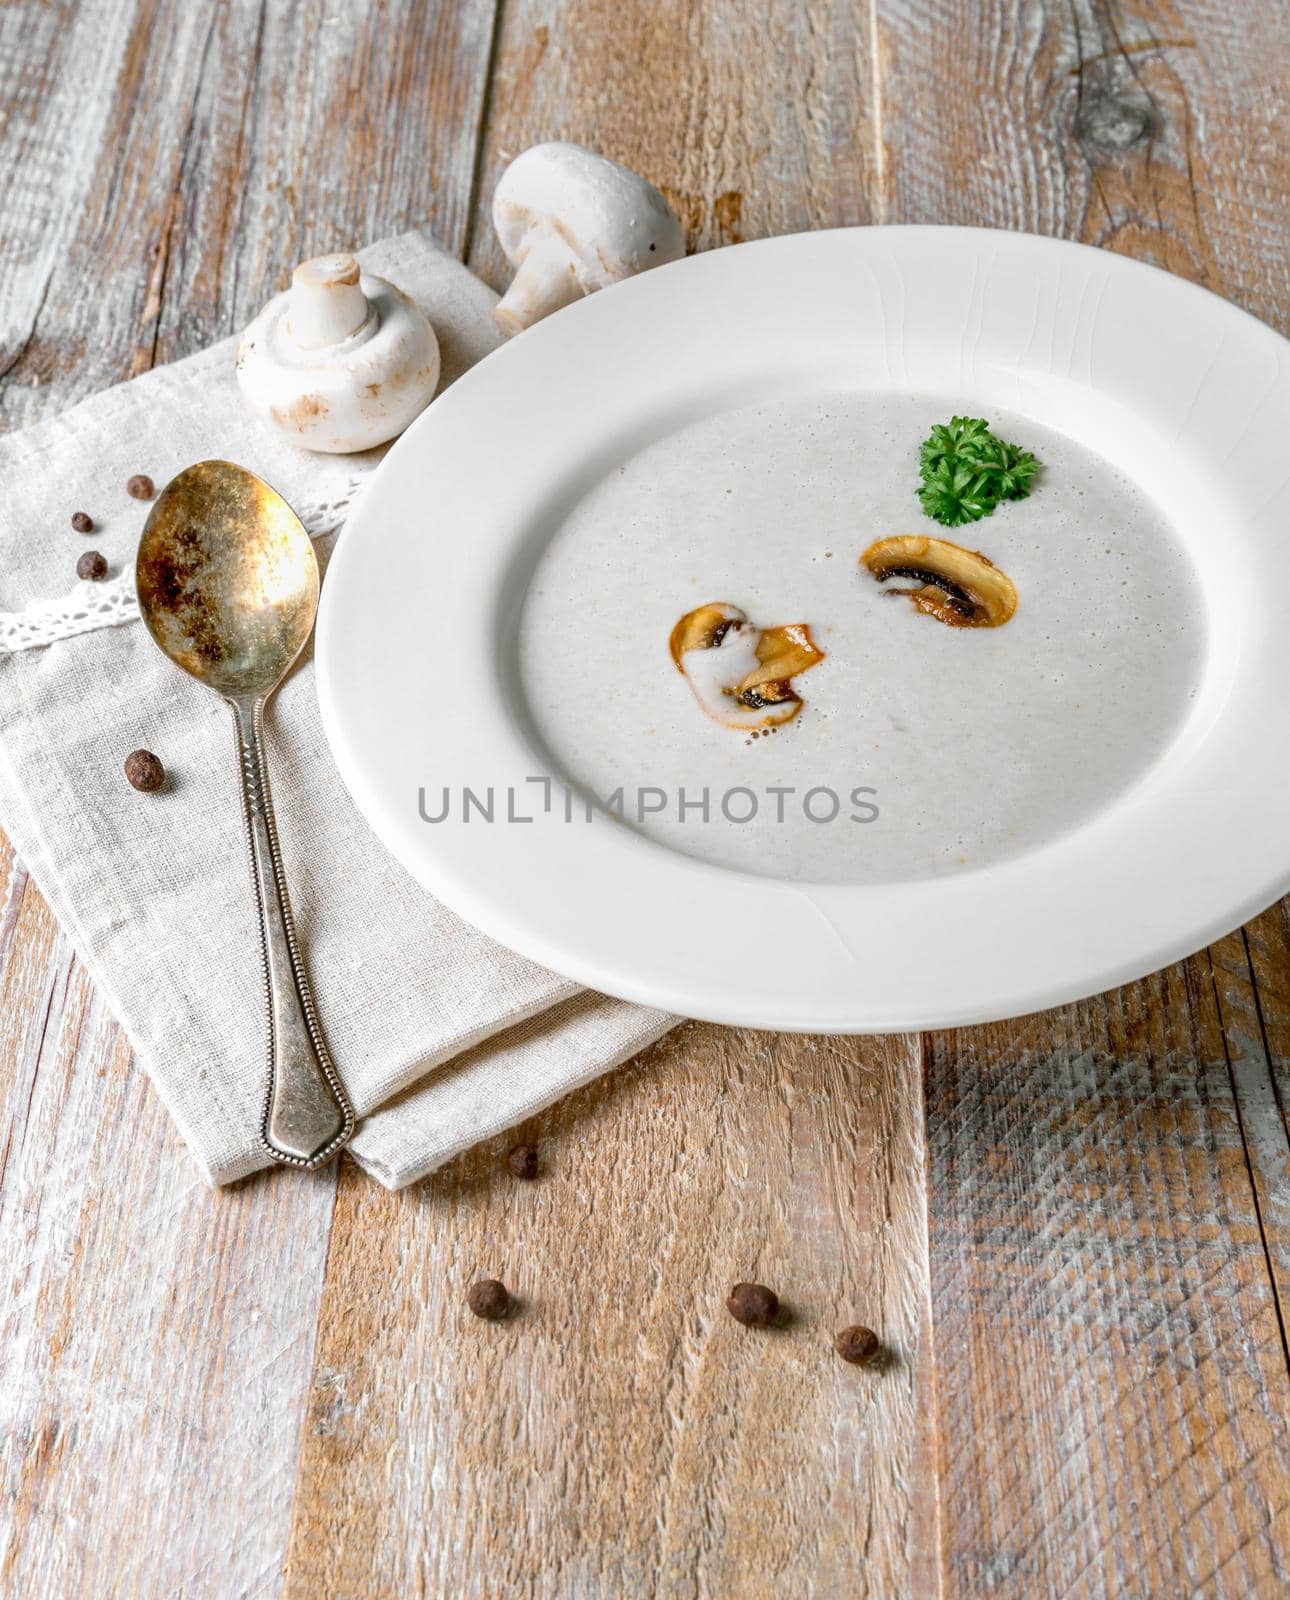 creamy mushroom soup with pieces of mushrooms in by tan4ikk1